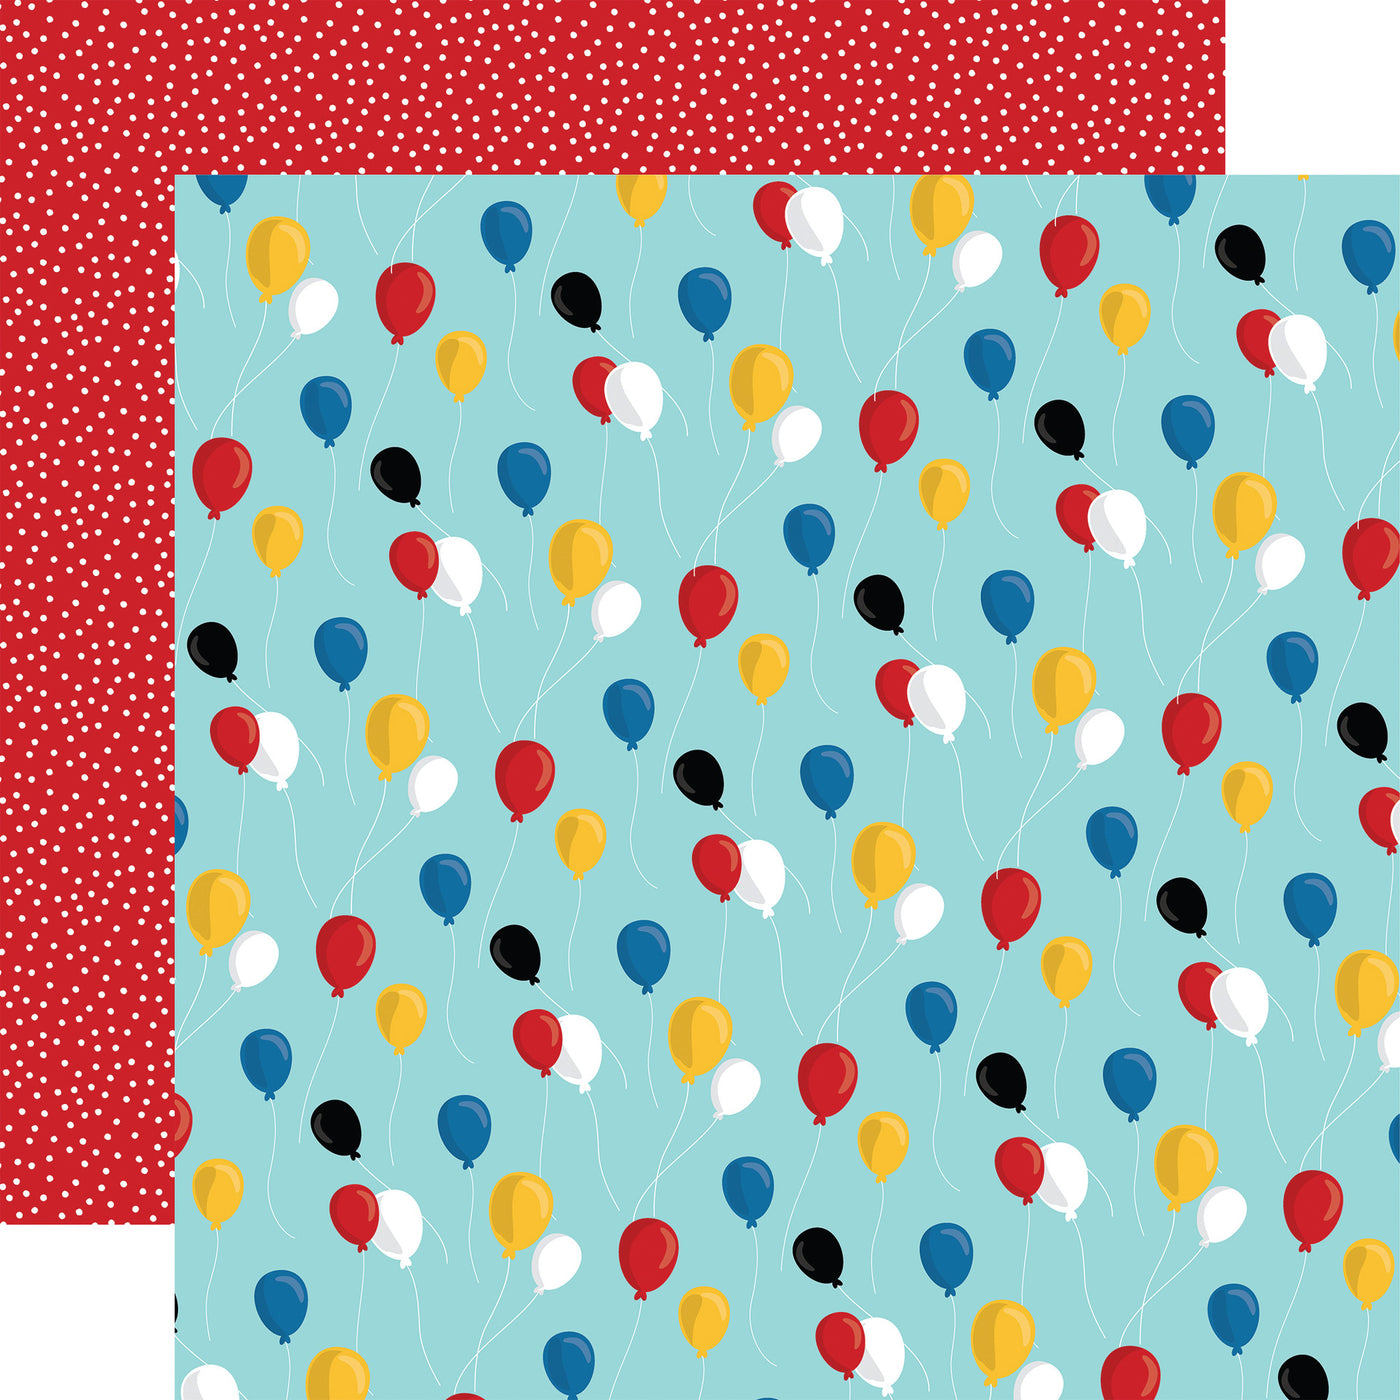 12x12 double-sided patterned paper - (Side A - balloons with strings in red, yellow, blue, and black all over on a light blue background; Side B - white dots all over on a red background) - Carta Bella.